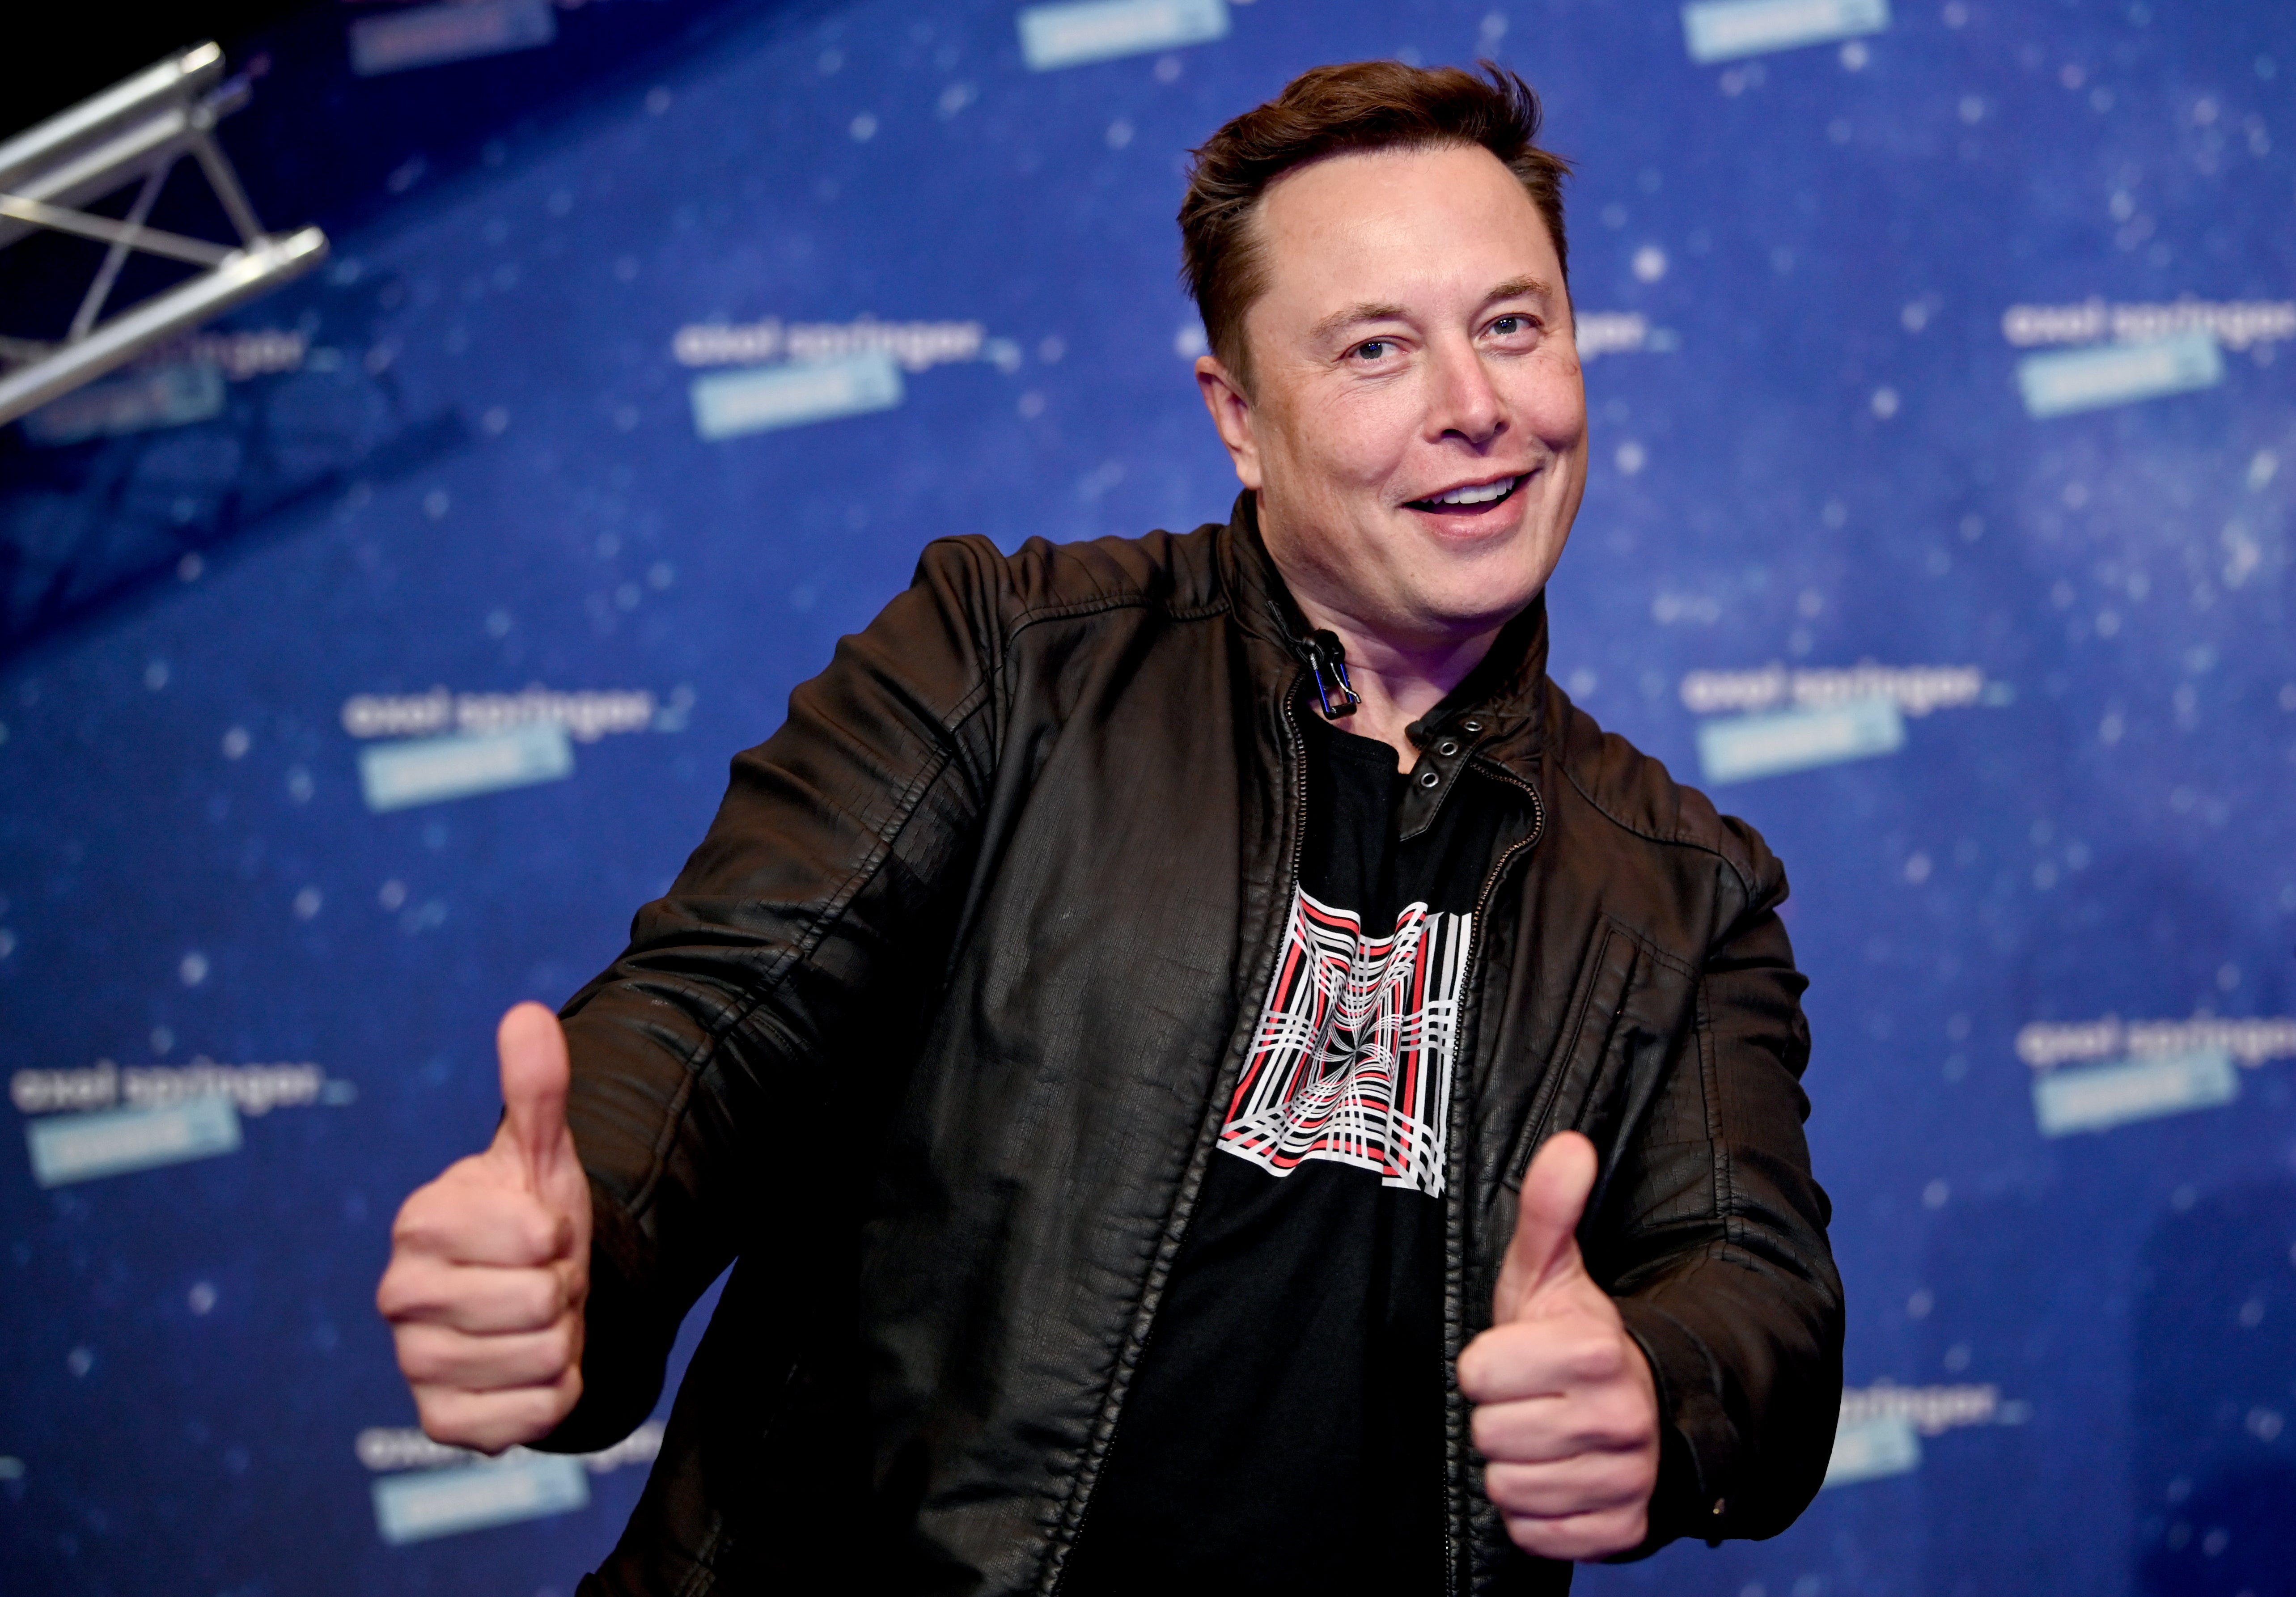 <p>SpaceX owner and Tesla CEO Elon Musk arrives on the red carpet for the Axel Springer Award 2020 in Berlin</p>